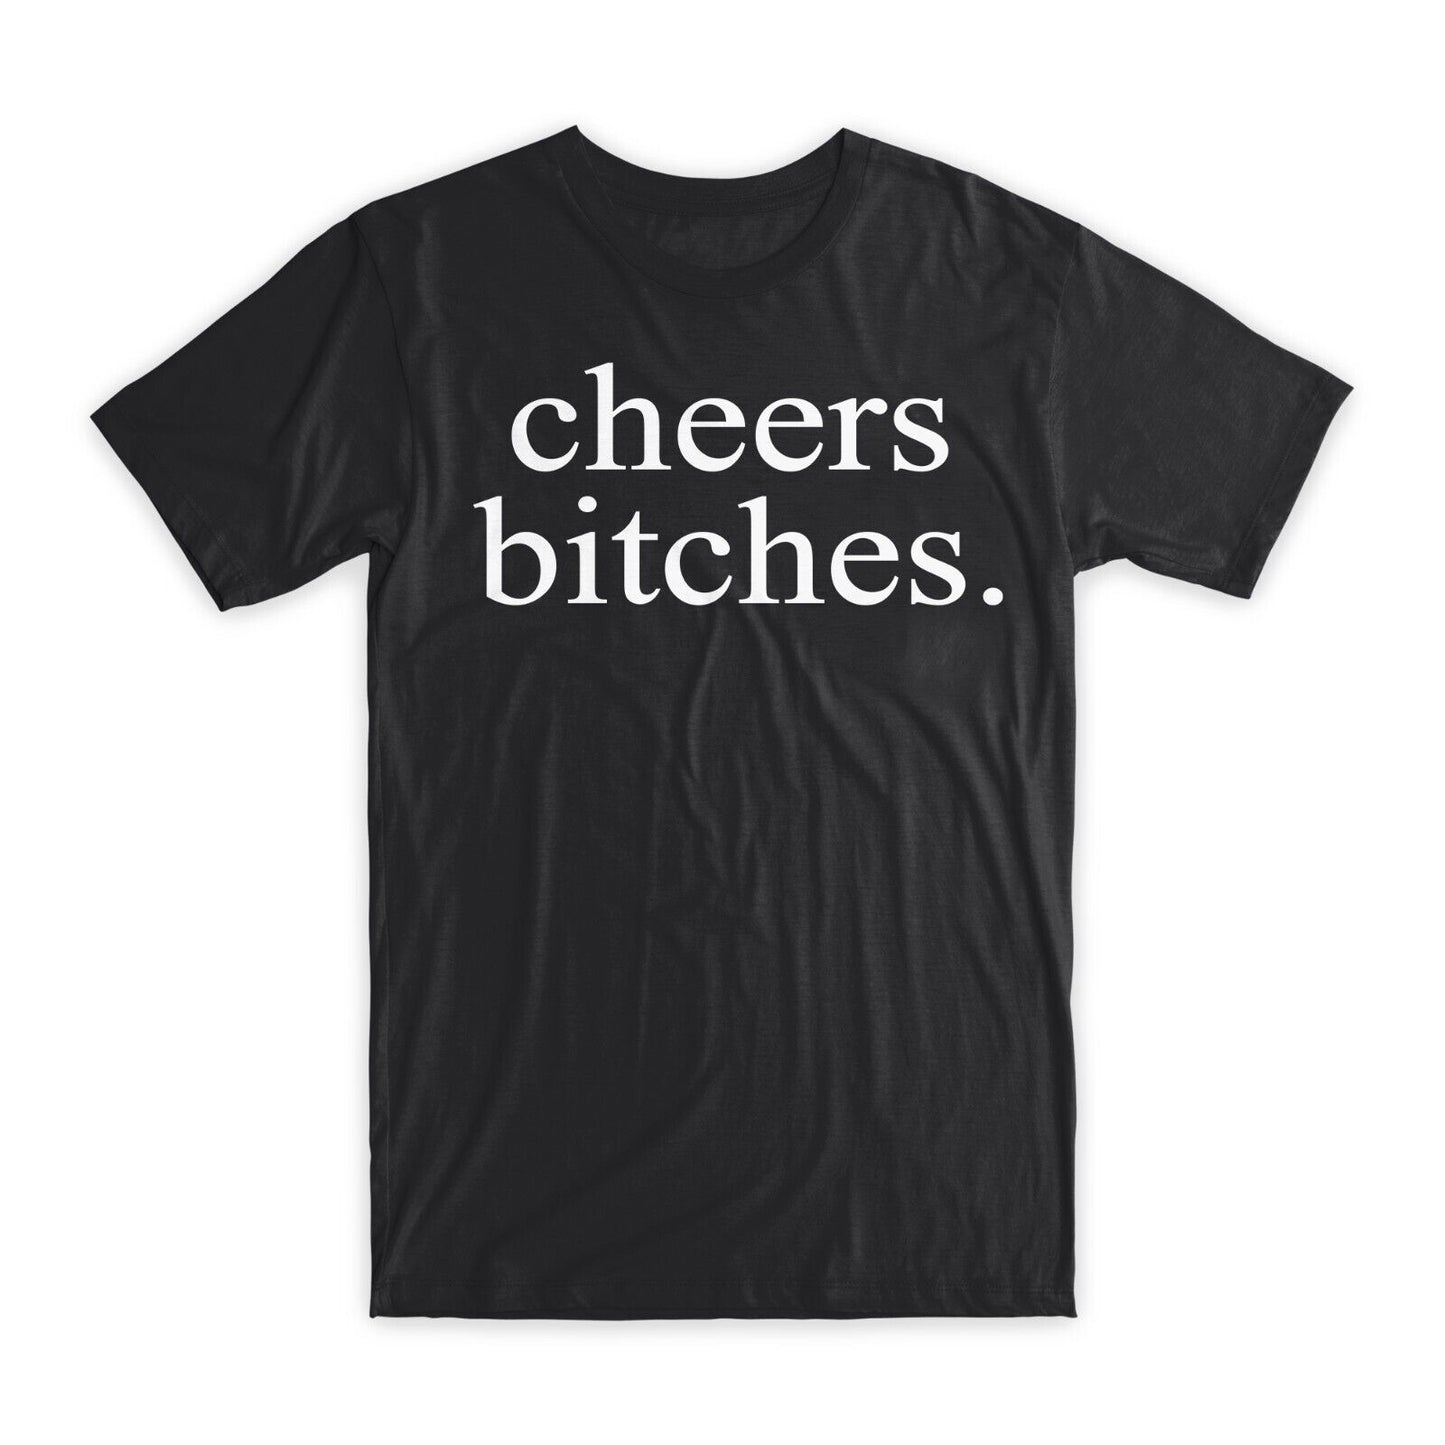 Cheers Bitches T-Shirt Premium Soft Cotton Crew Neck Funny Tees Novelty Gift NEW